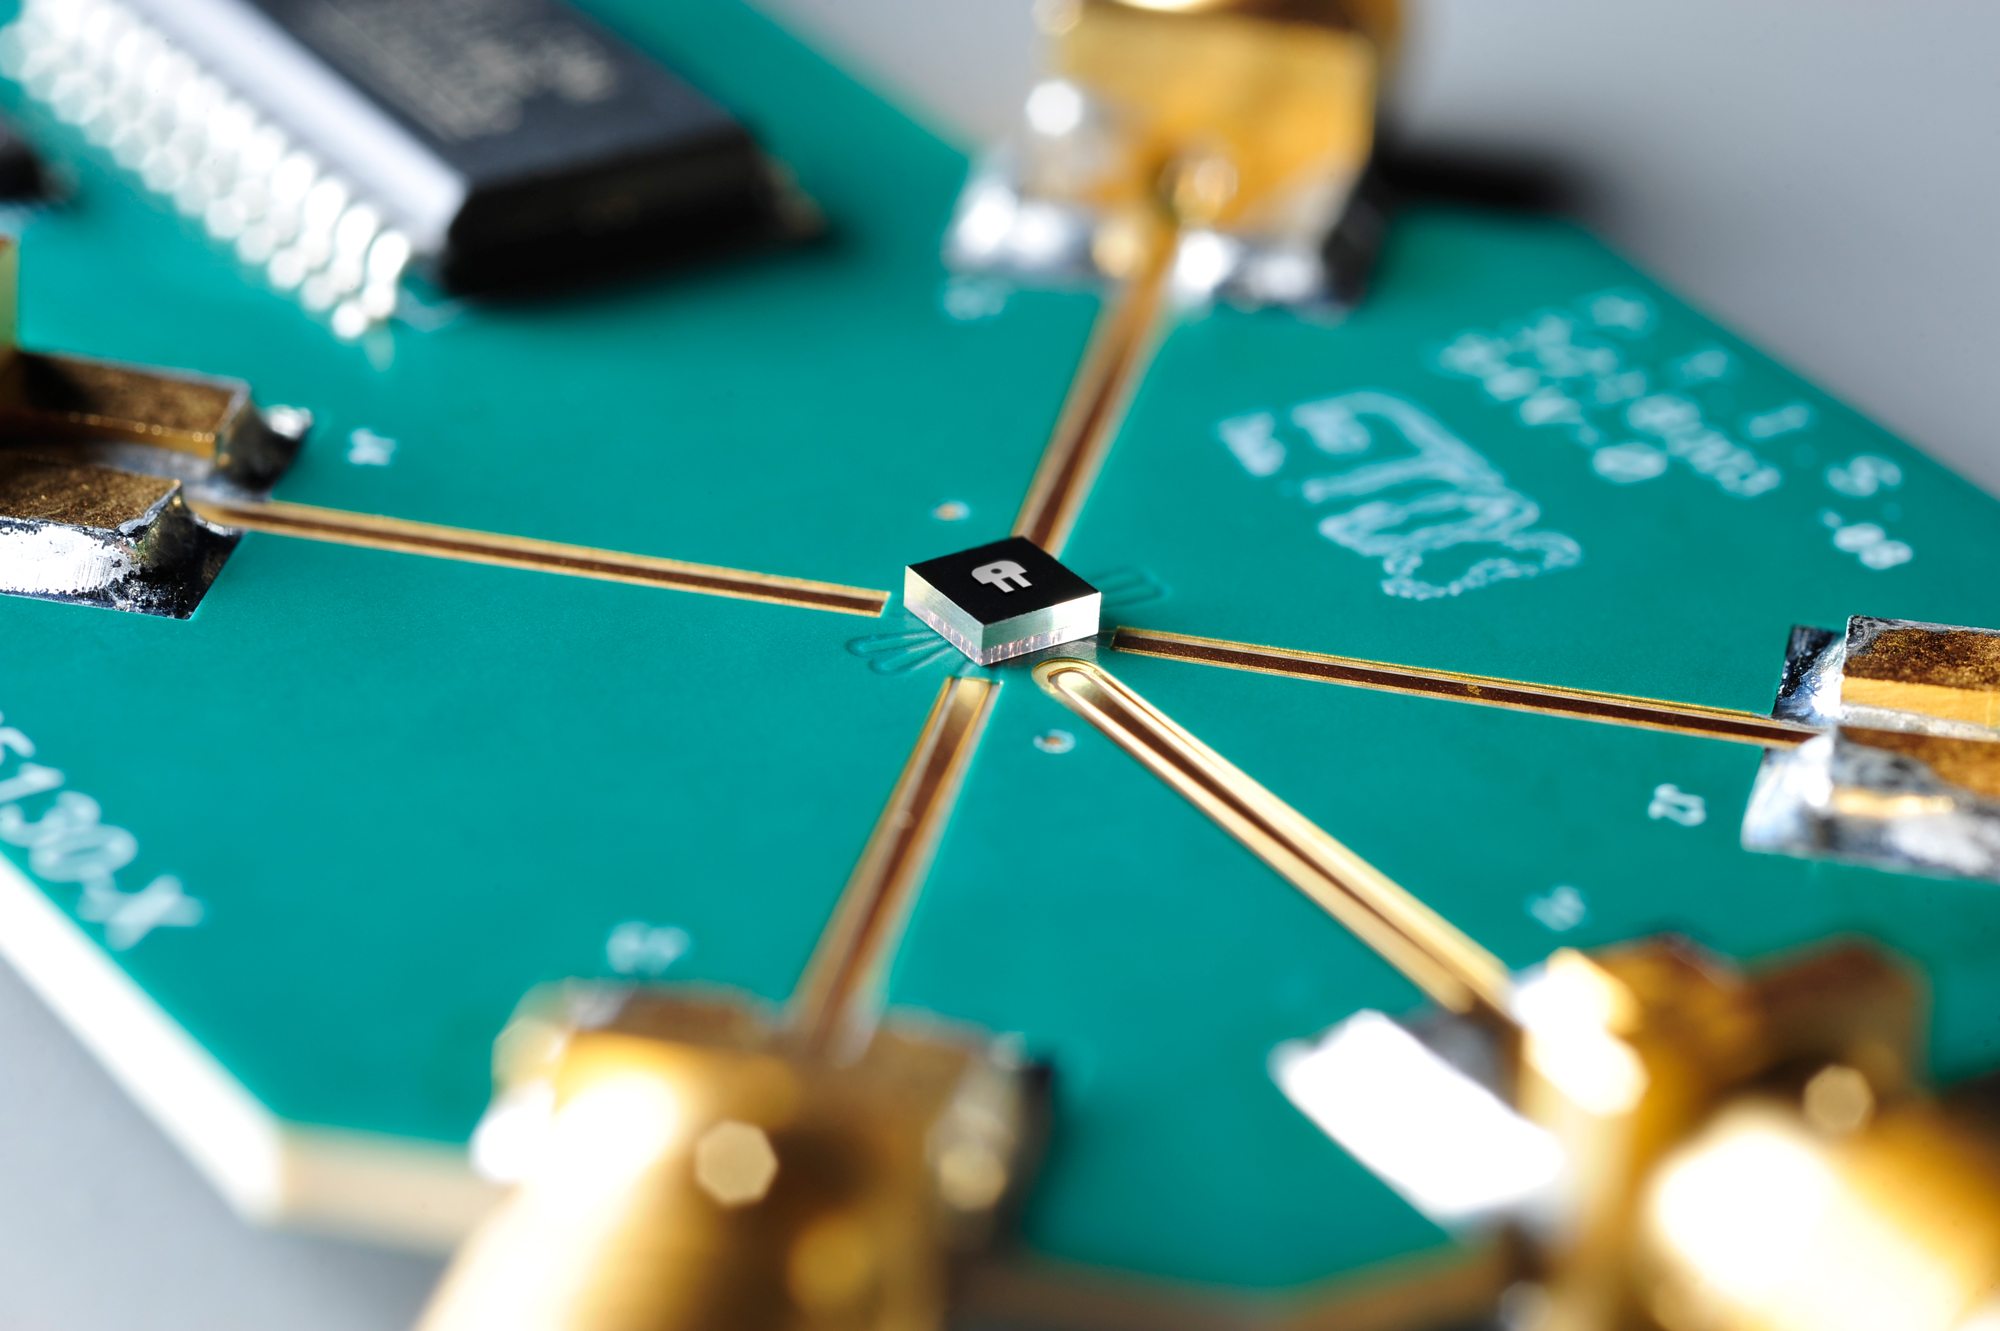 menlo-micro-a-startup-bringing-semiconductor-tech-to-the-humble-switch-is-ready-for-its-closeup